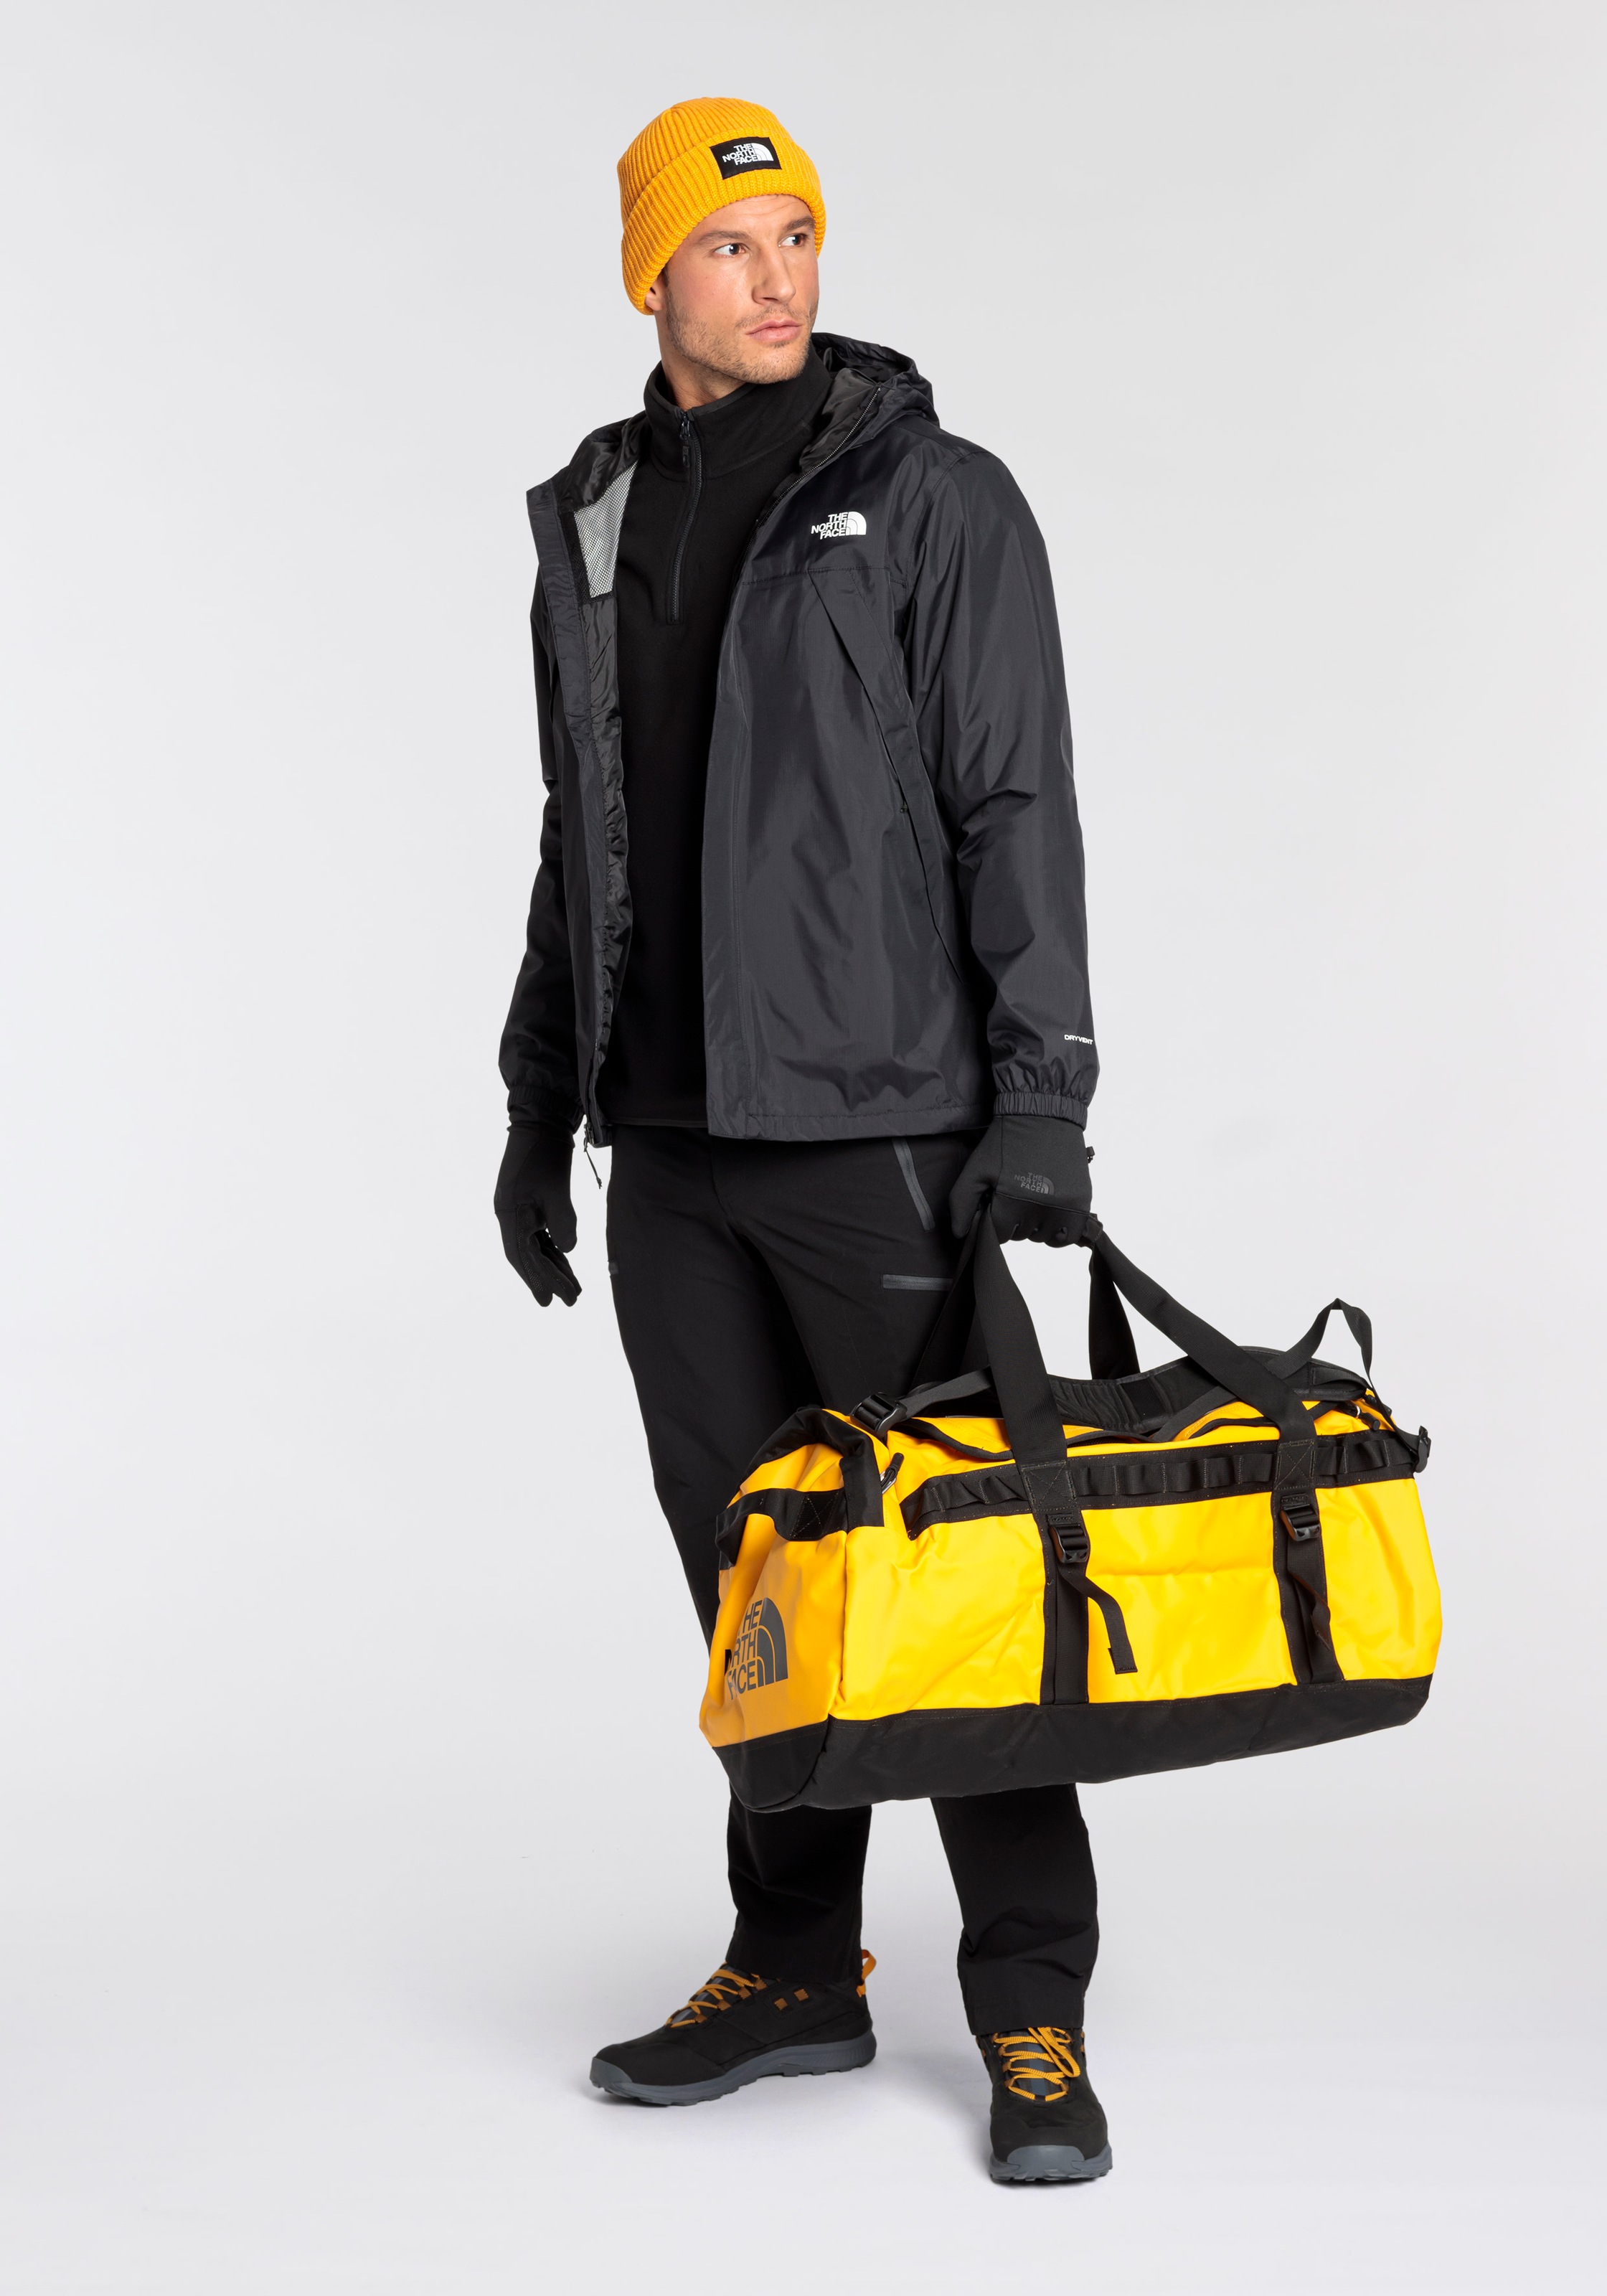 The North Face Reisetasche "BASE CAMP DUFFEL"